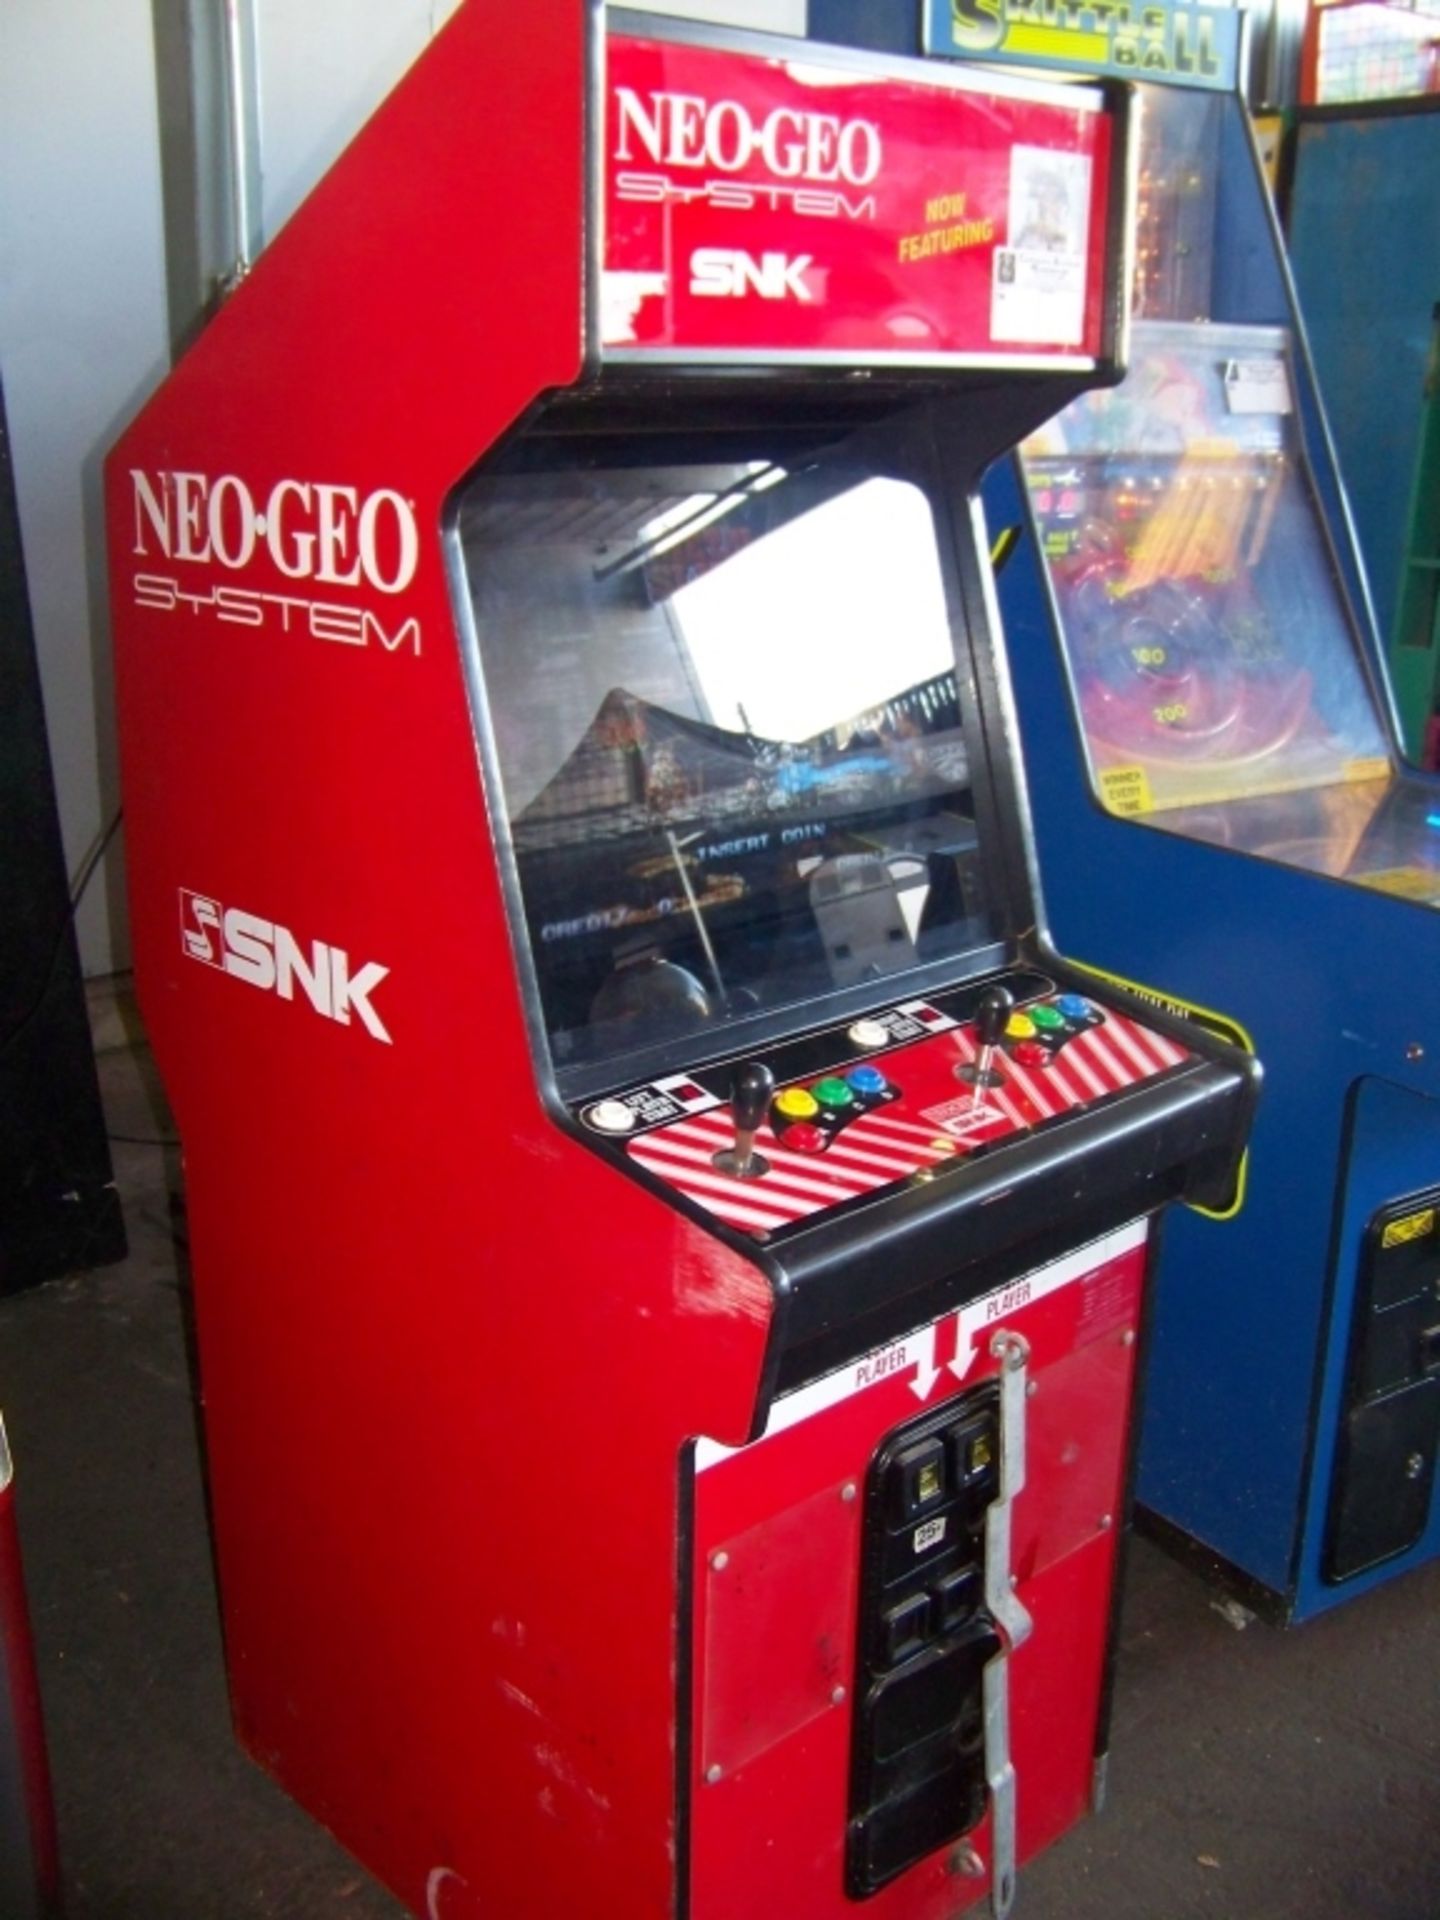 NEO GEO 1SLOT SNK DEDICATED ARCADE GAME Item is in used condition. Evidence of wear and commercial - Image 3 of 3